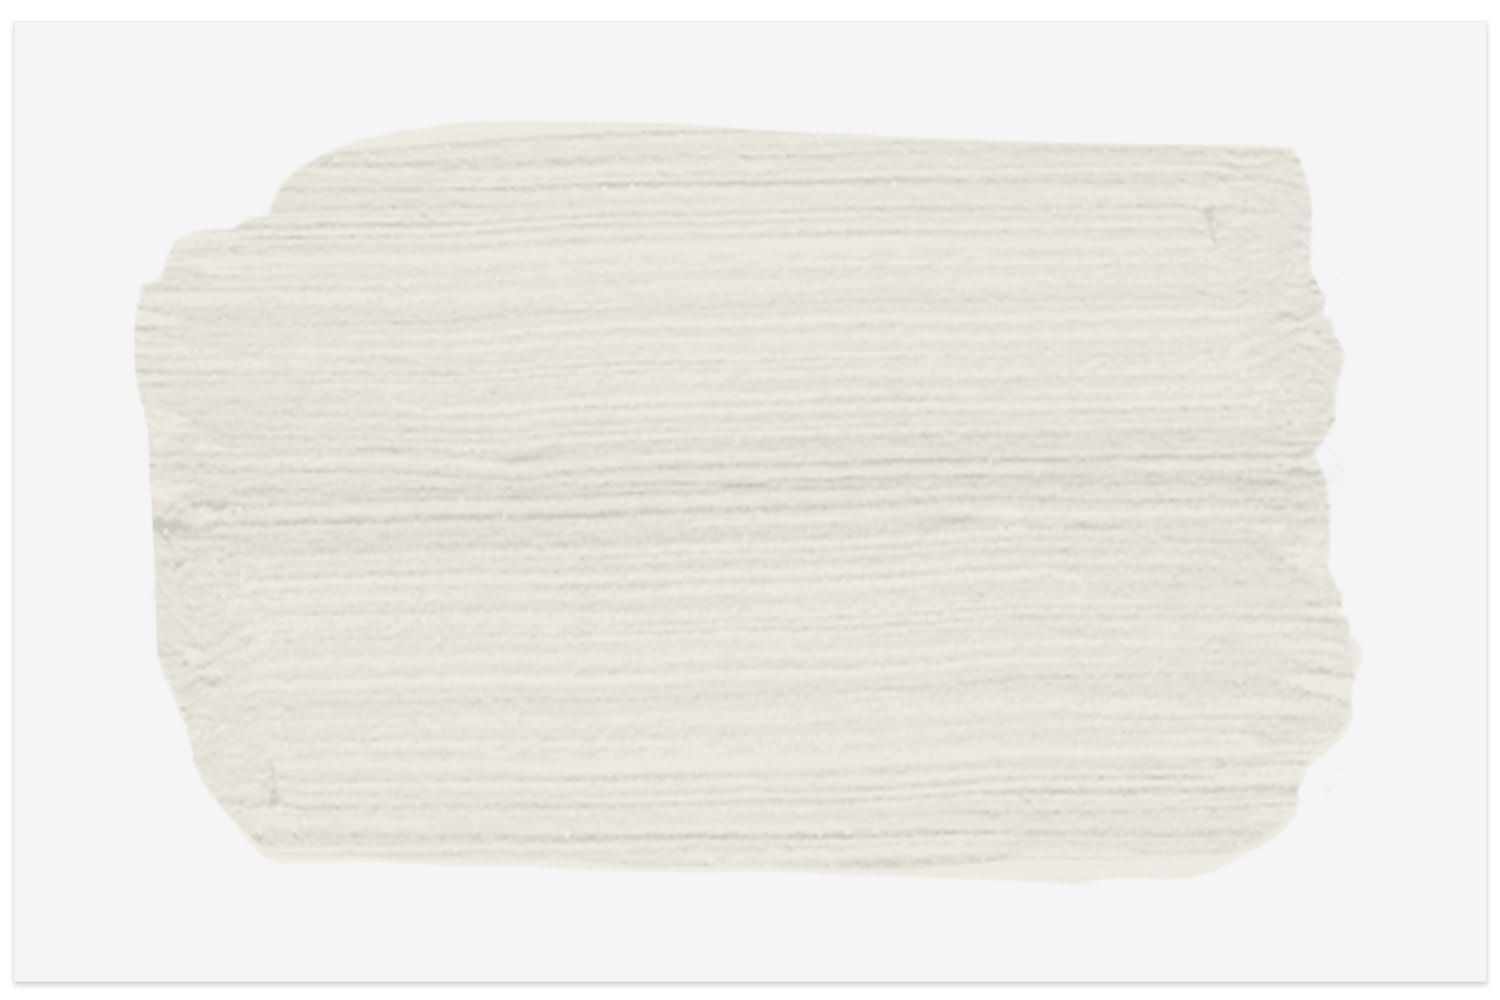 Alabaster paint swatch from Sherwin-Williams